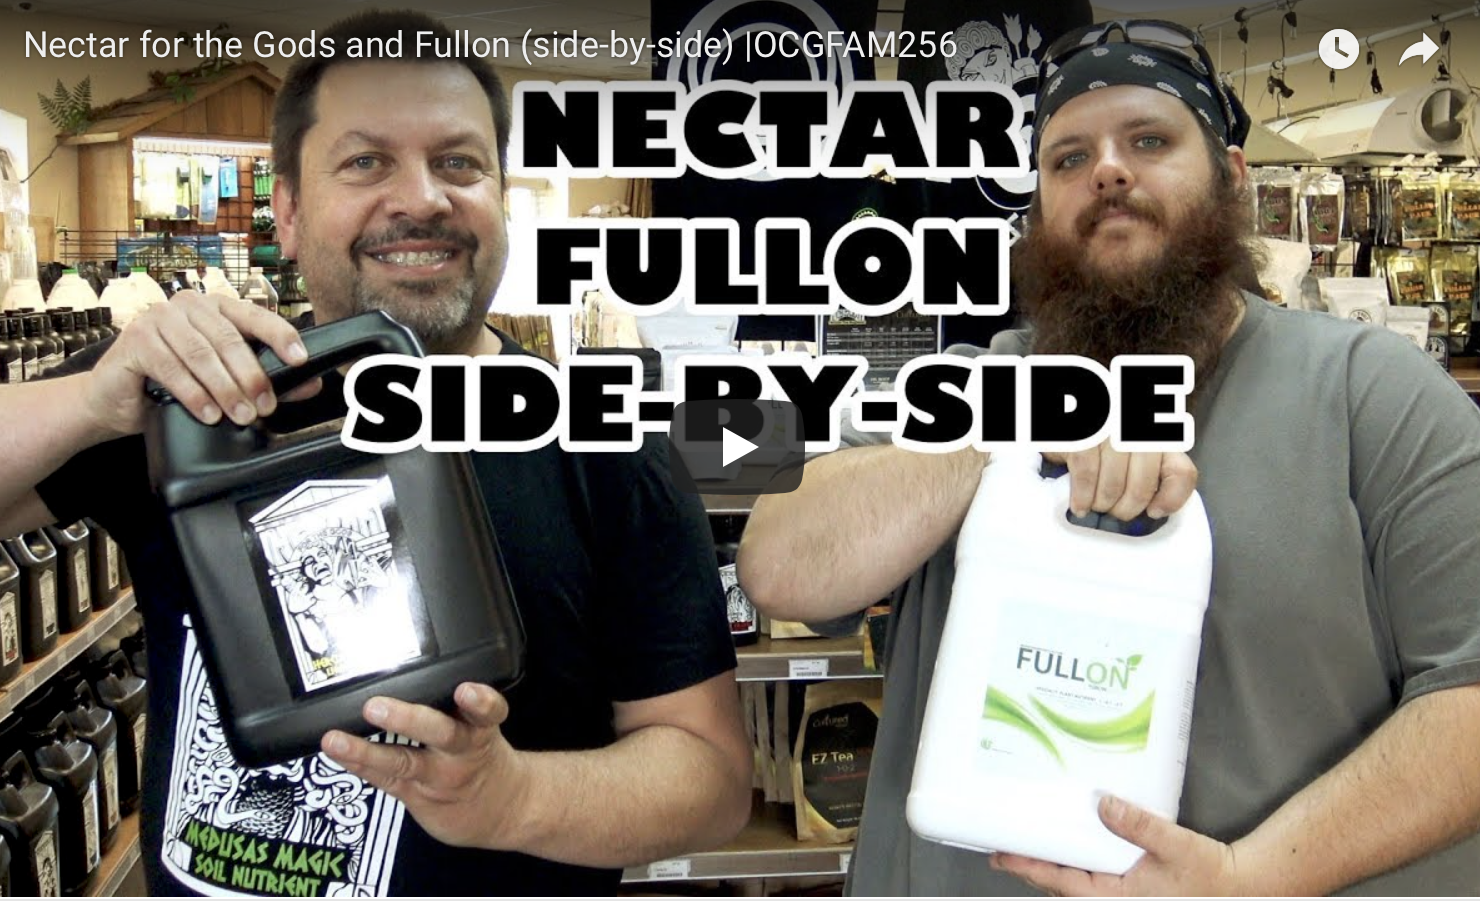 Nectar for the Gods and Fullon (side-by-side) |OCGFAM256